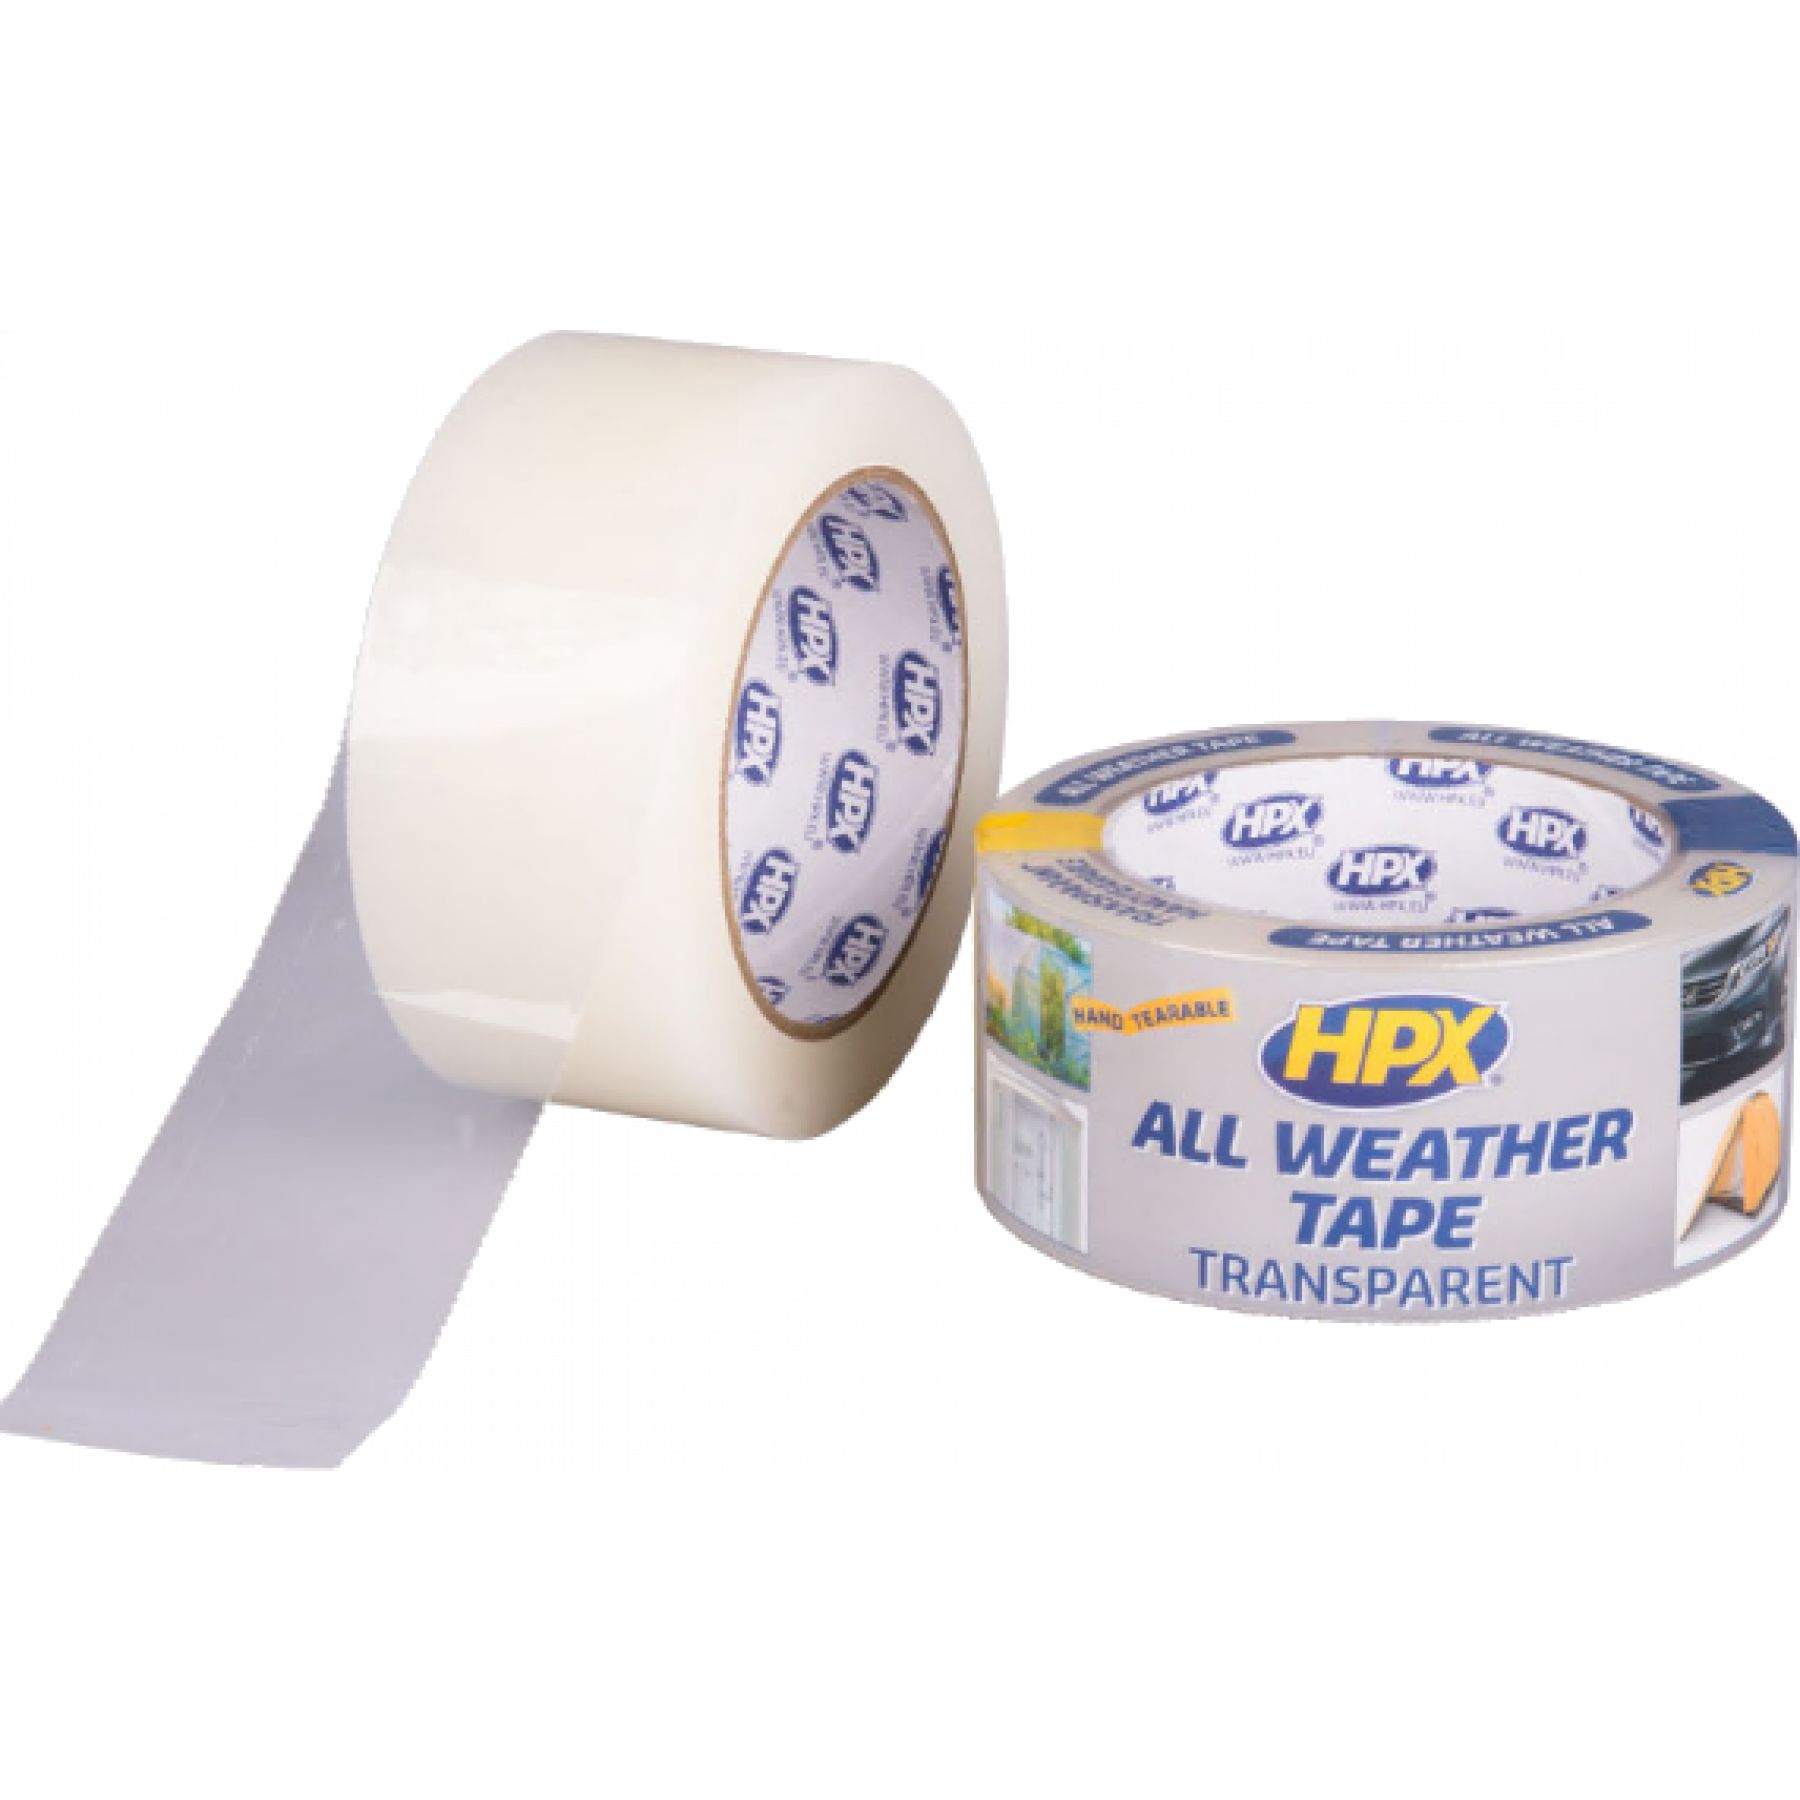 All weather tape 25m x 48mm